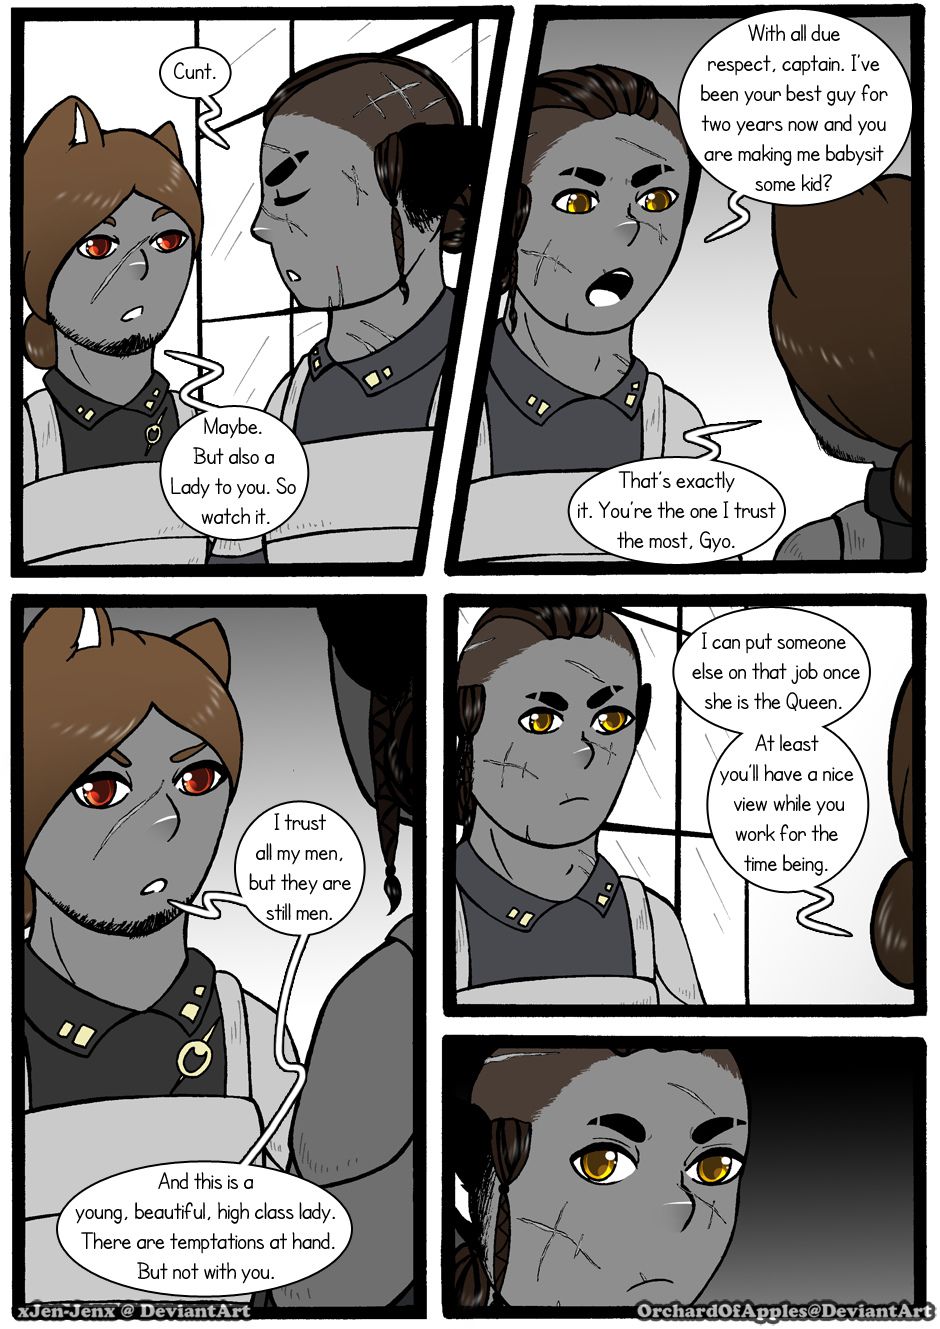 [Jeny-jen94] Between Kings and Queens [Ongoing] 164